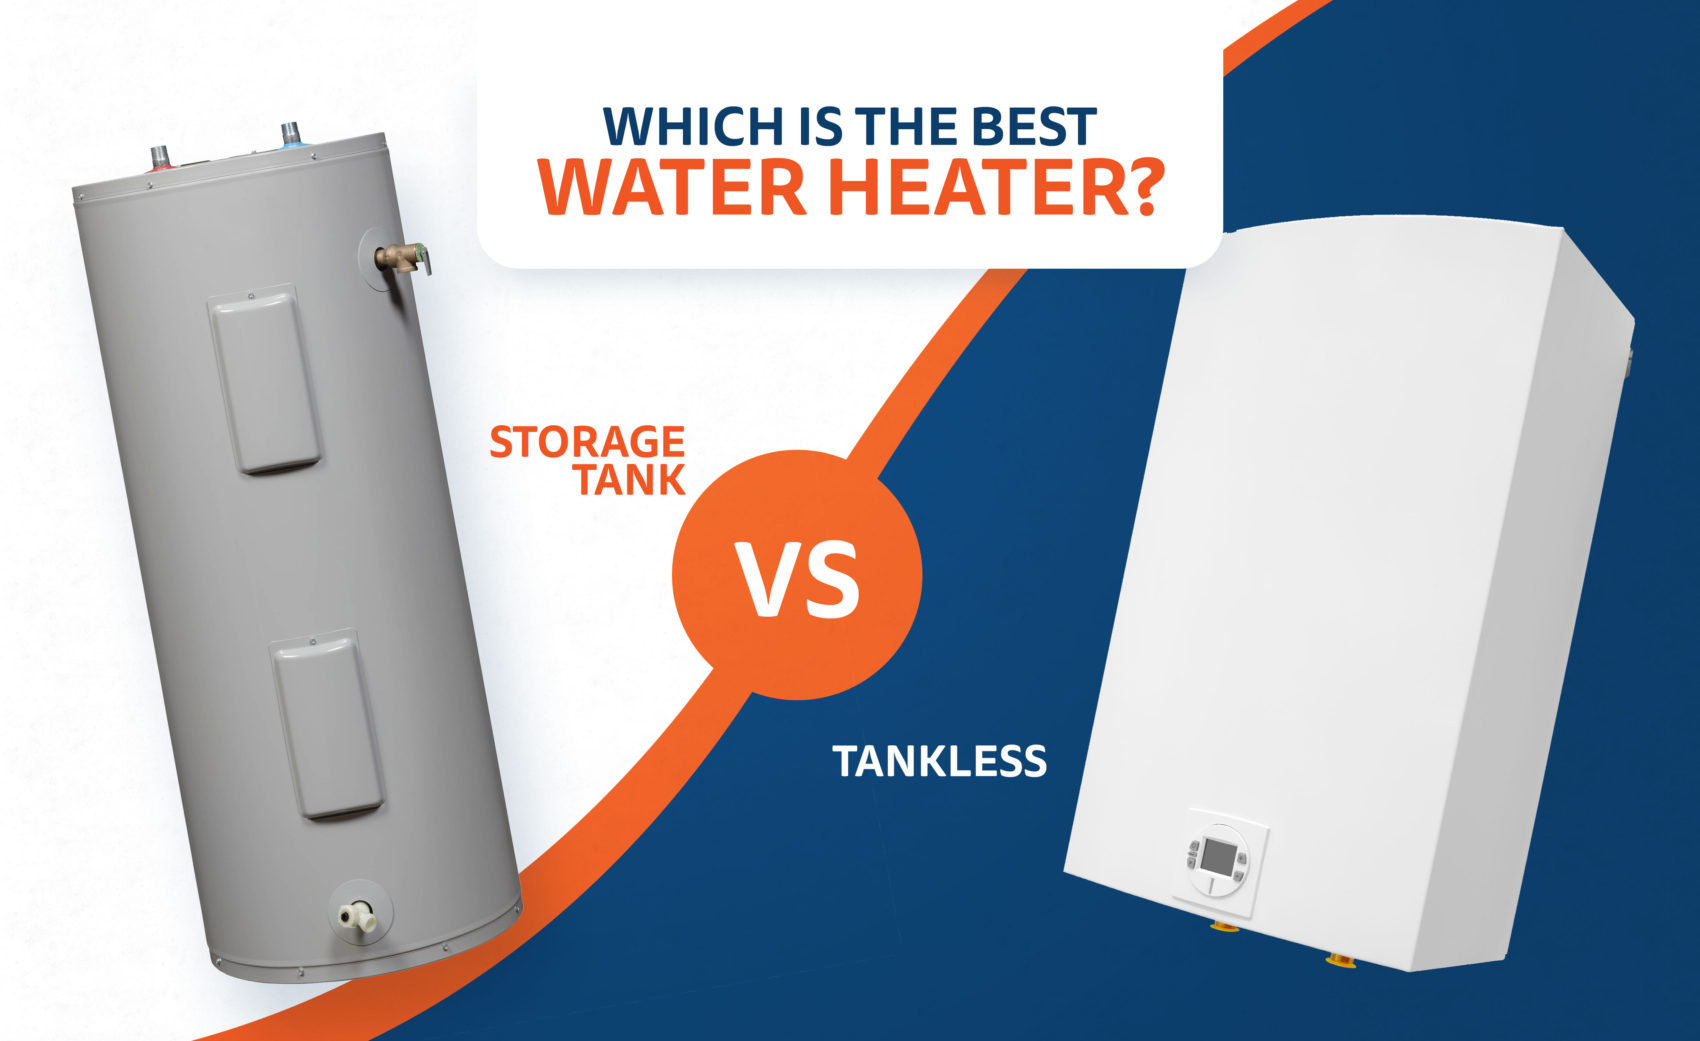 Is Tank or Tankless the Best Water Heater?